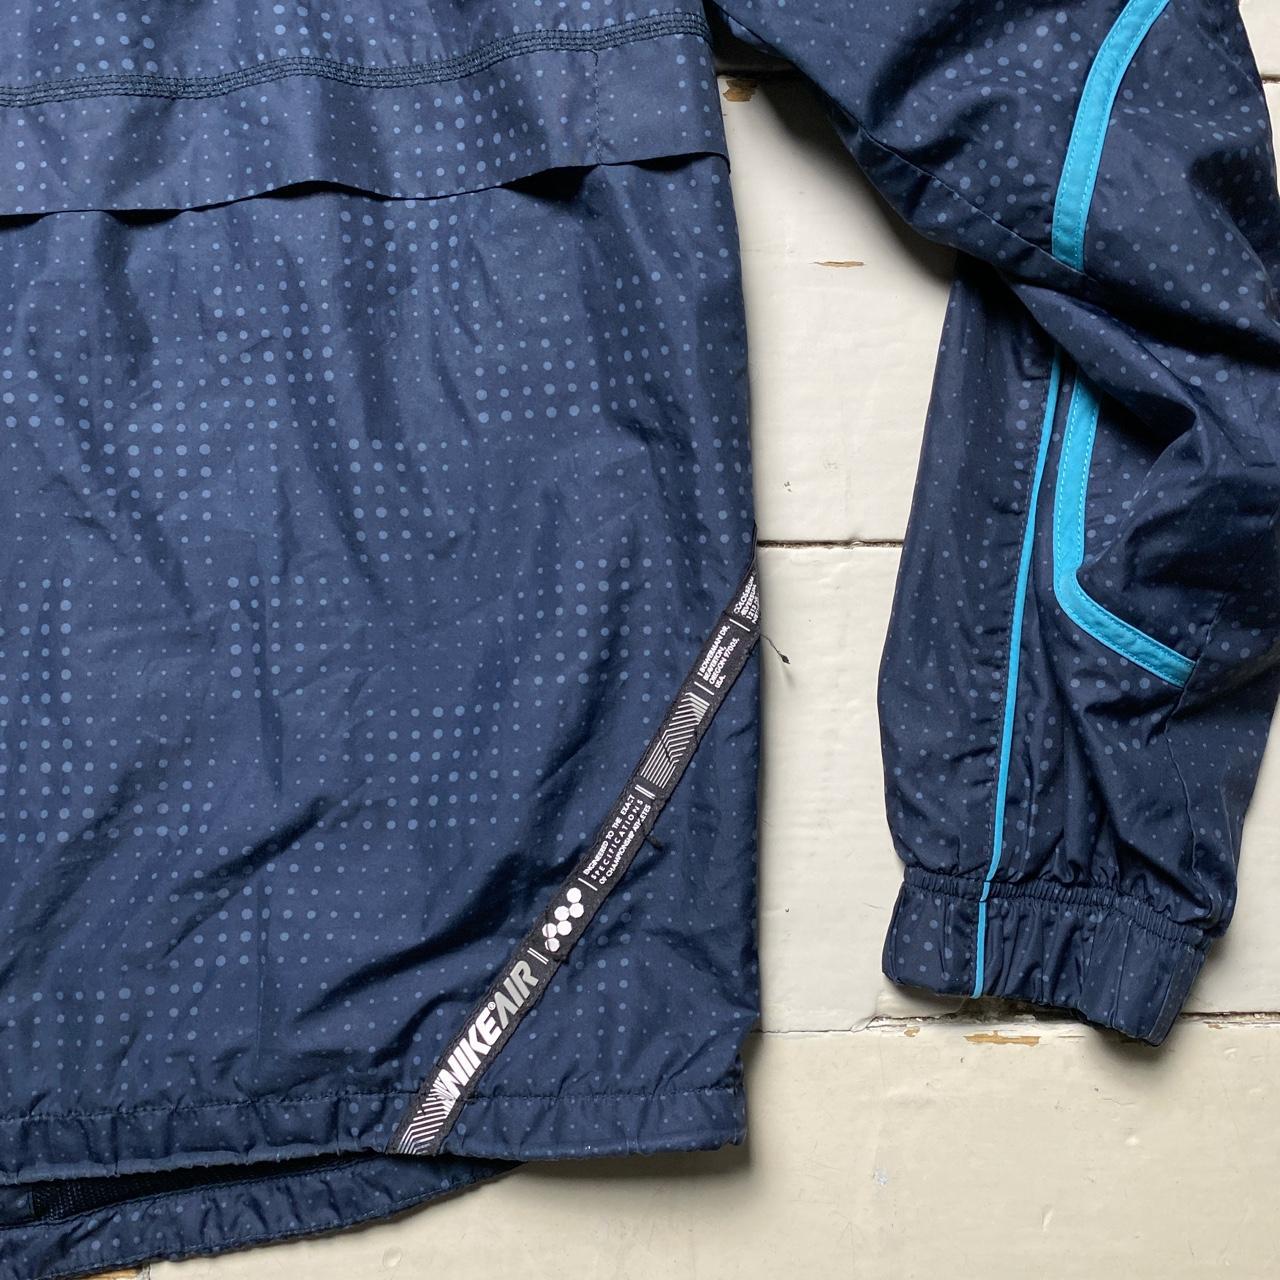 Nike Air Vintage Shell Jacket Navy and Light Blue